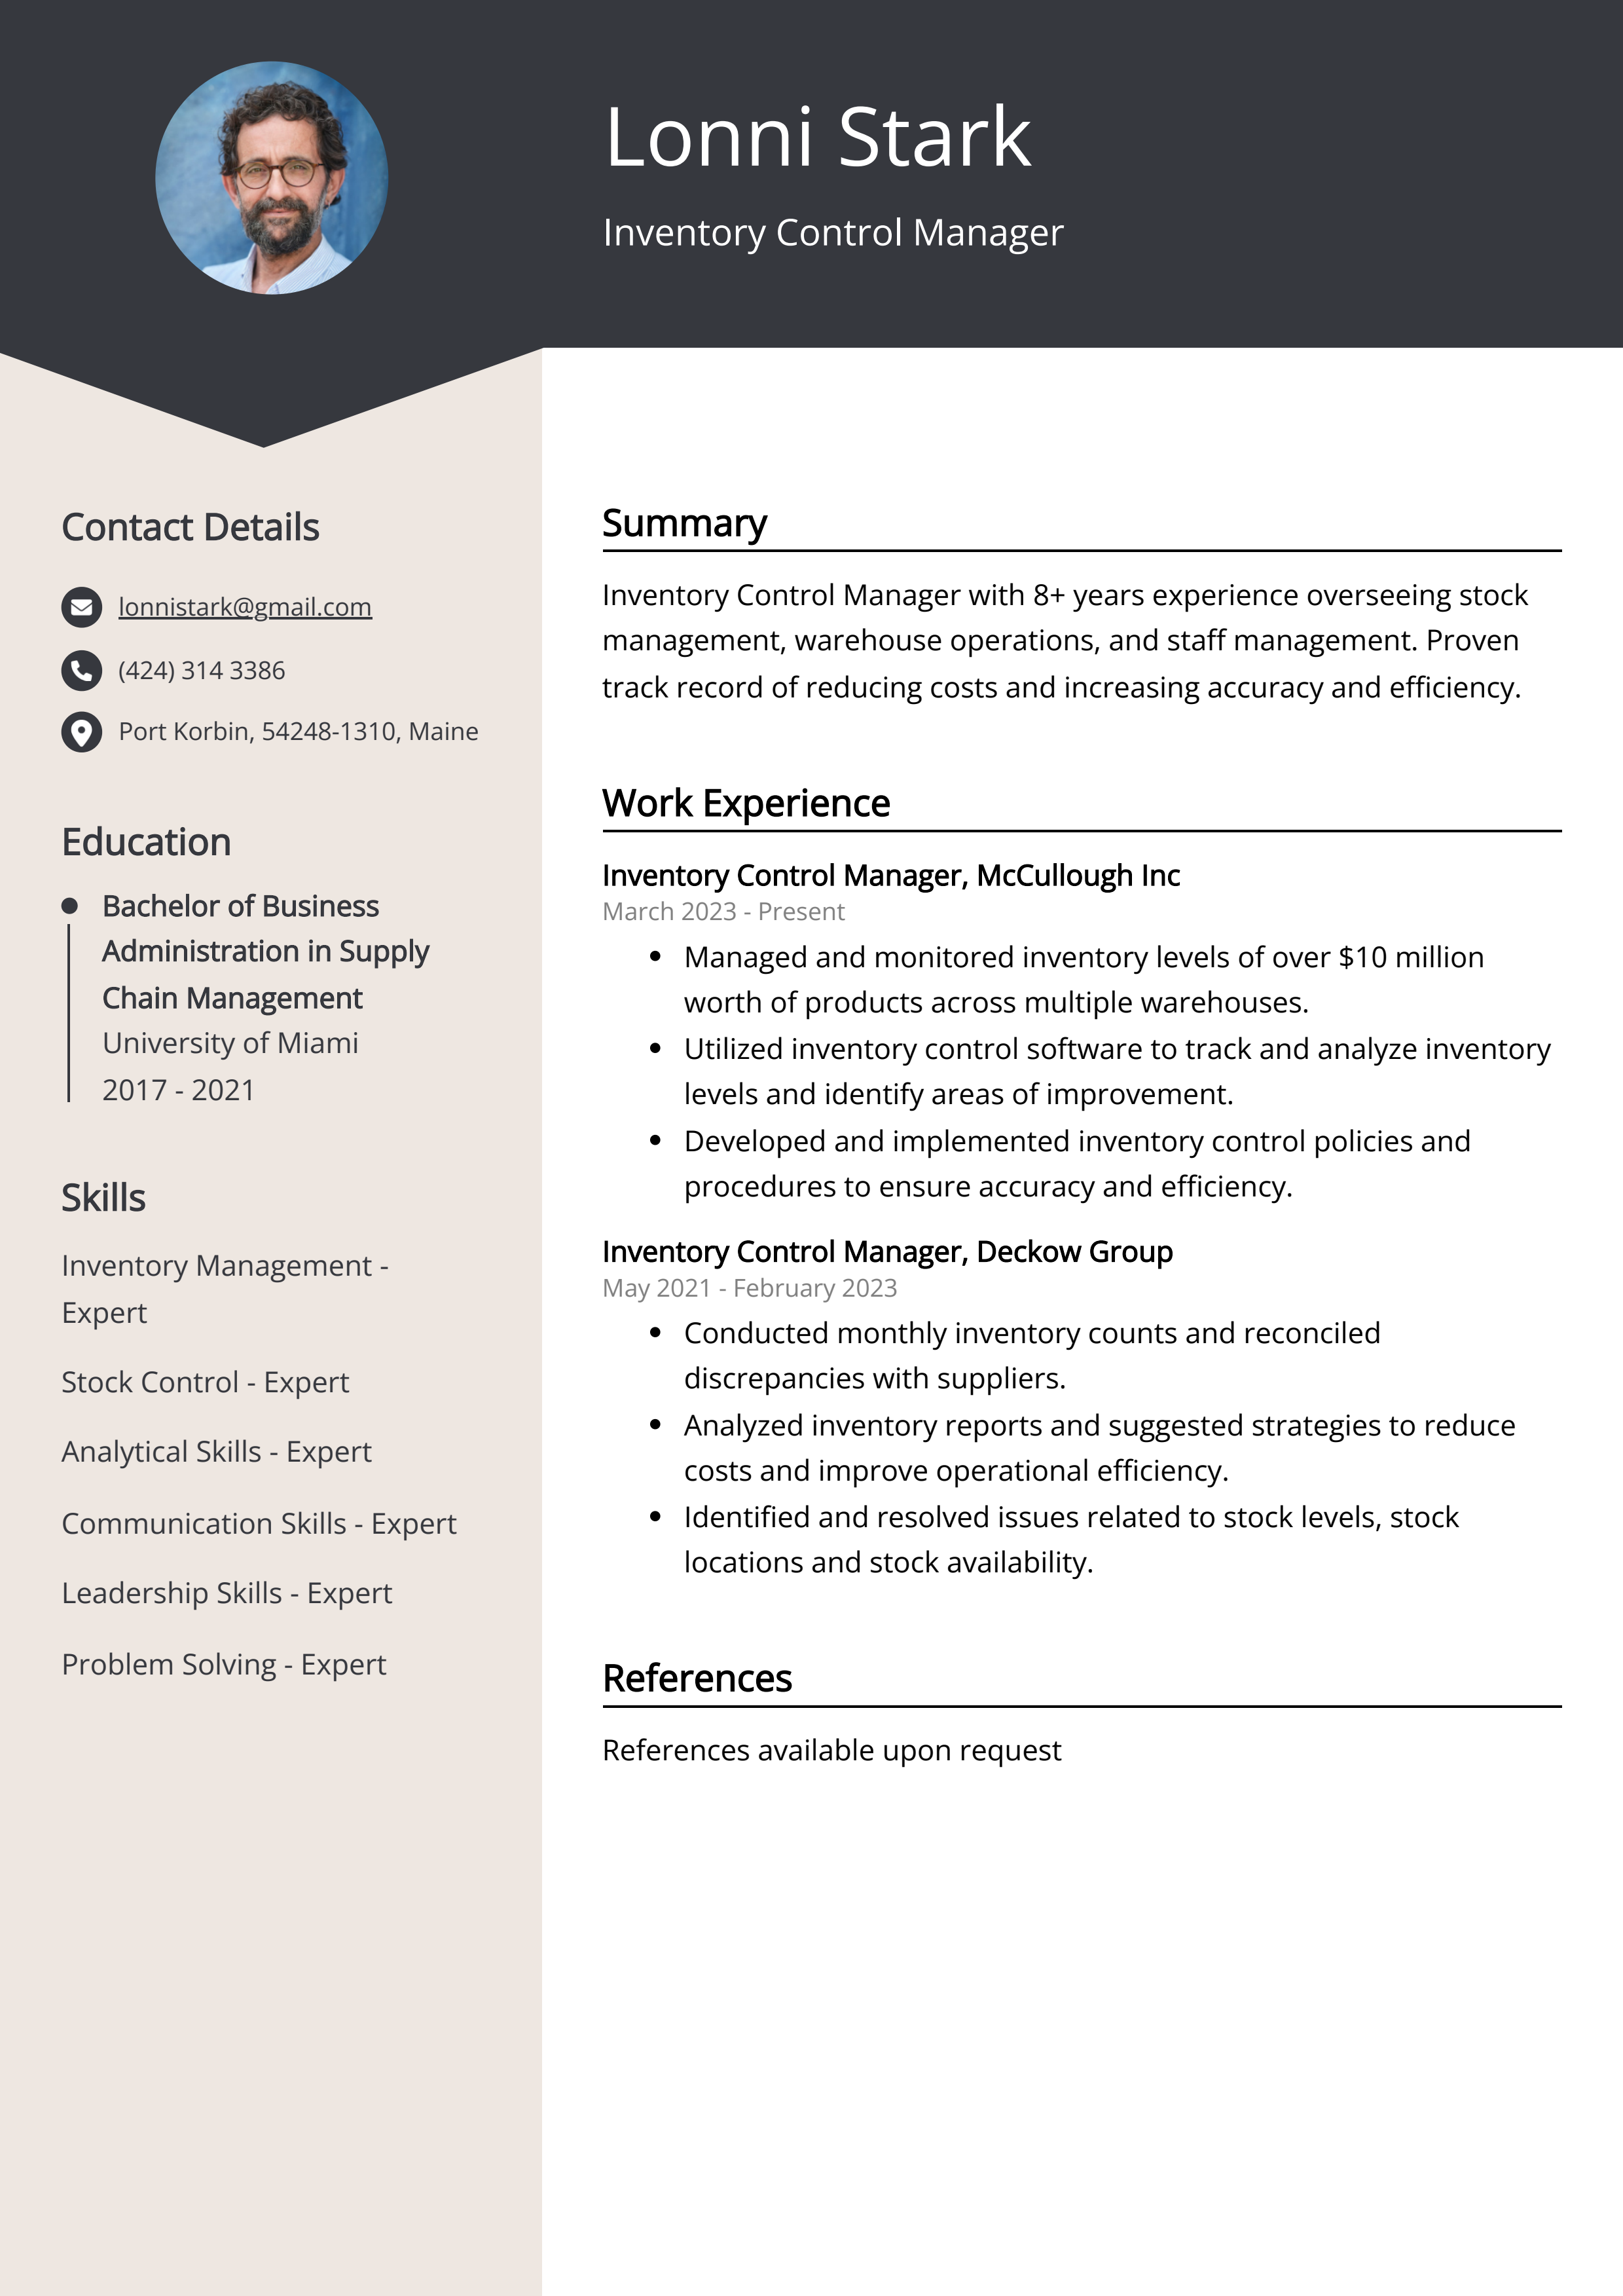 Inventory Control Manager CV Example